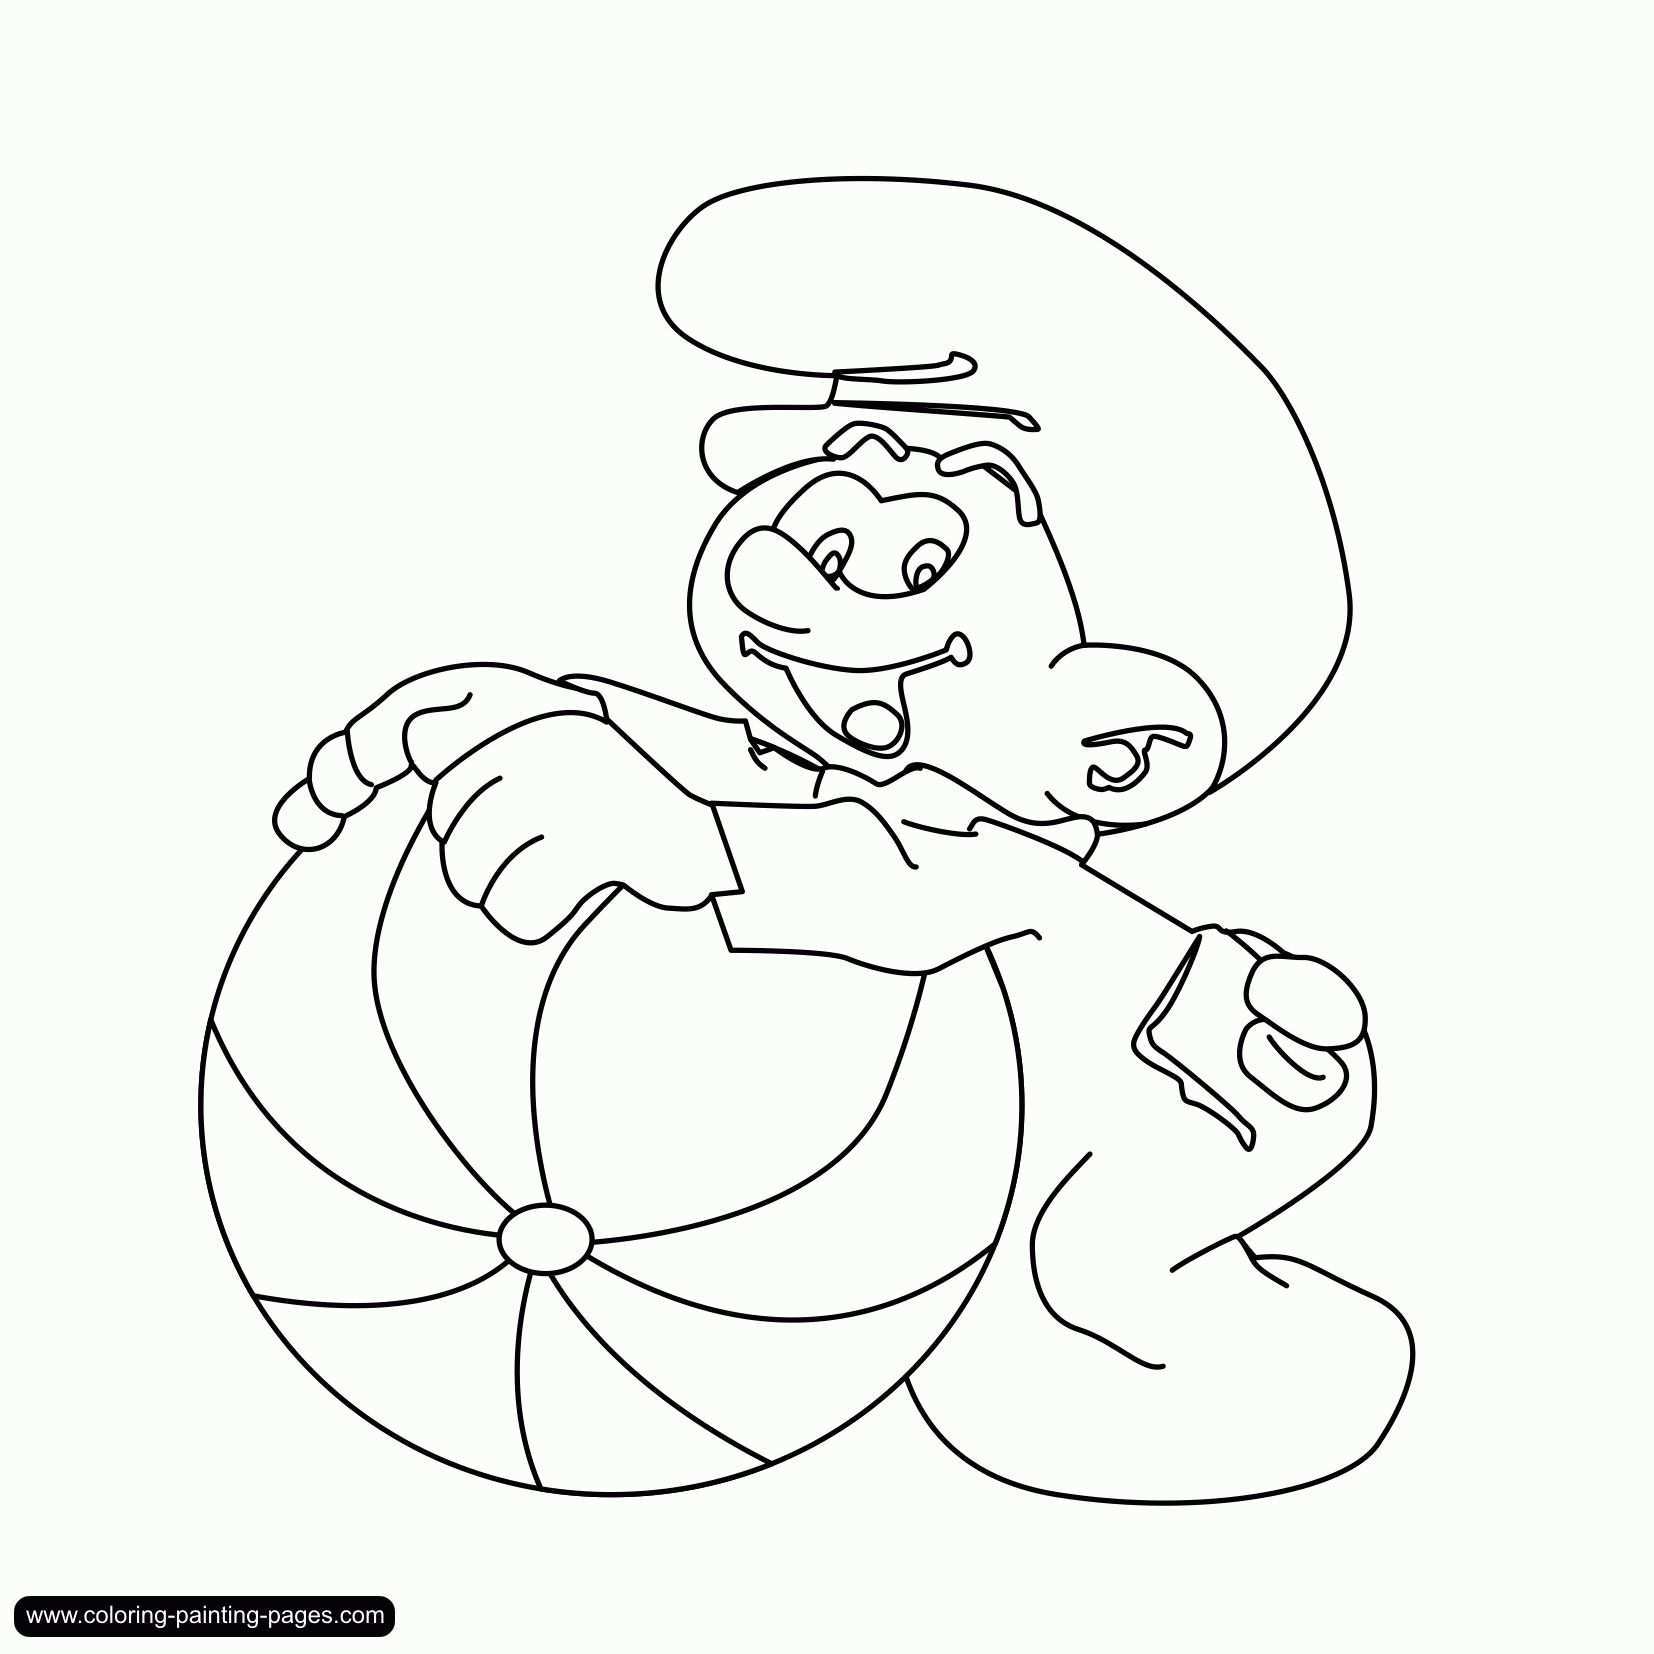 Smurf Coloring Pages Pdf Coloring Pages Allow Kids To Accompany Their Favorite Charac